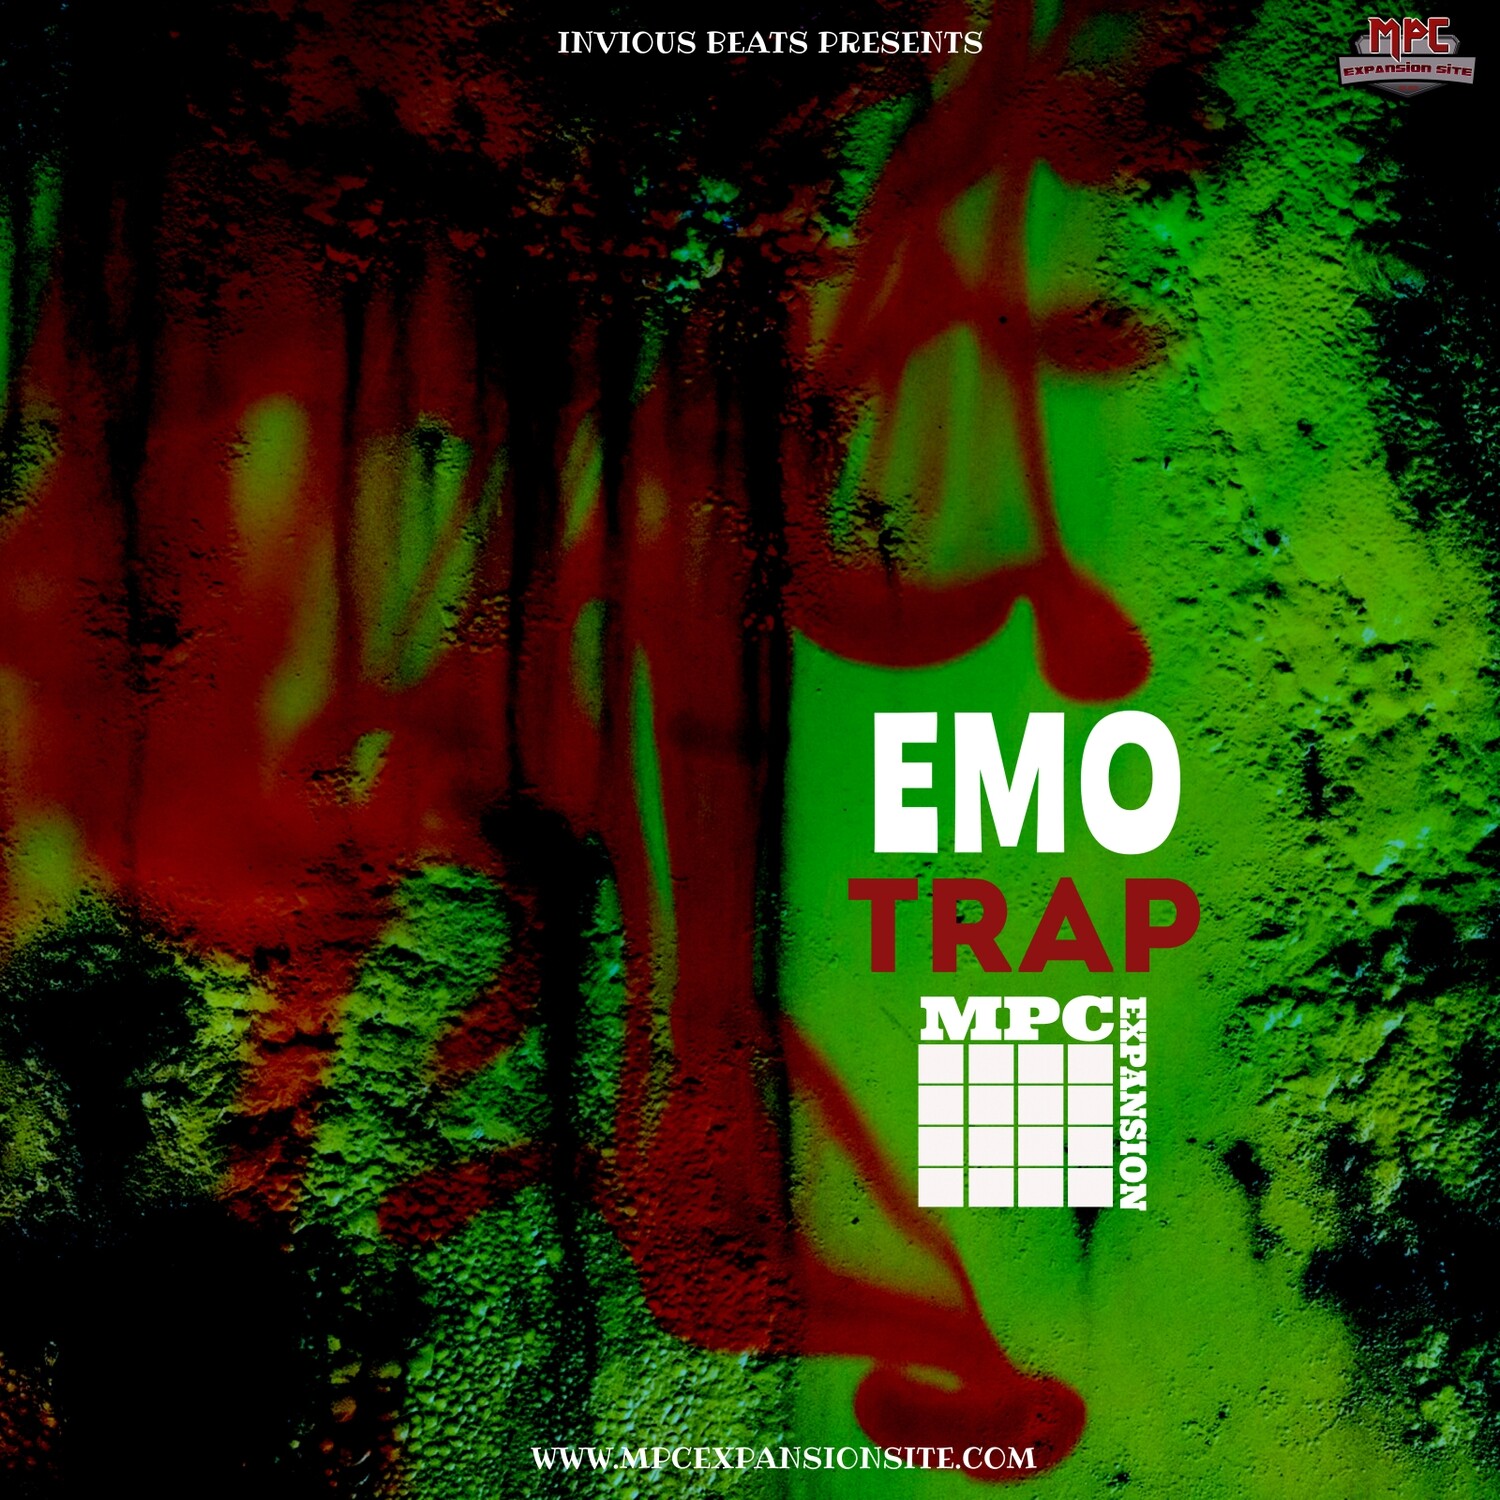 MPC EXPANSION 'EMO TRAP' by INVIOUS